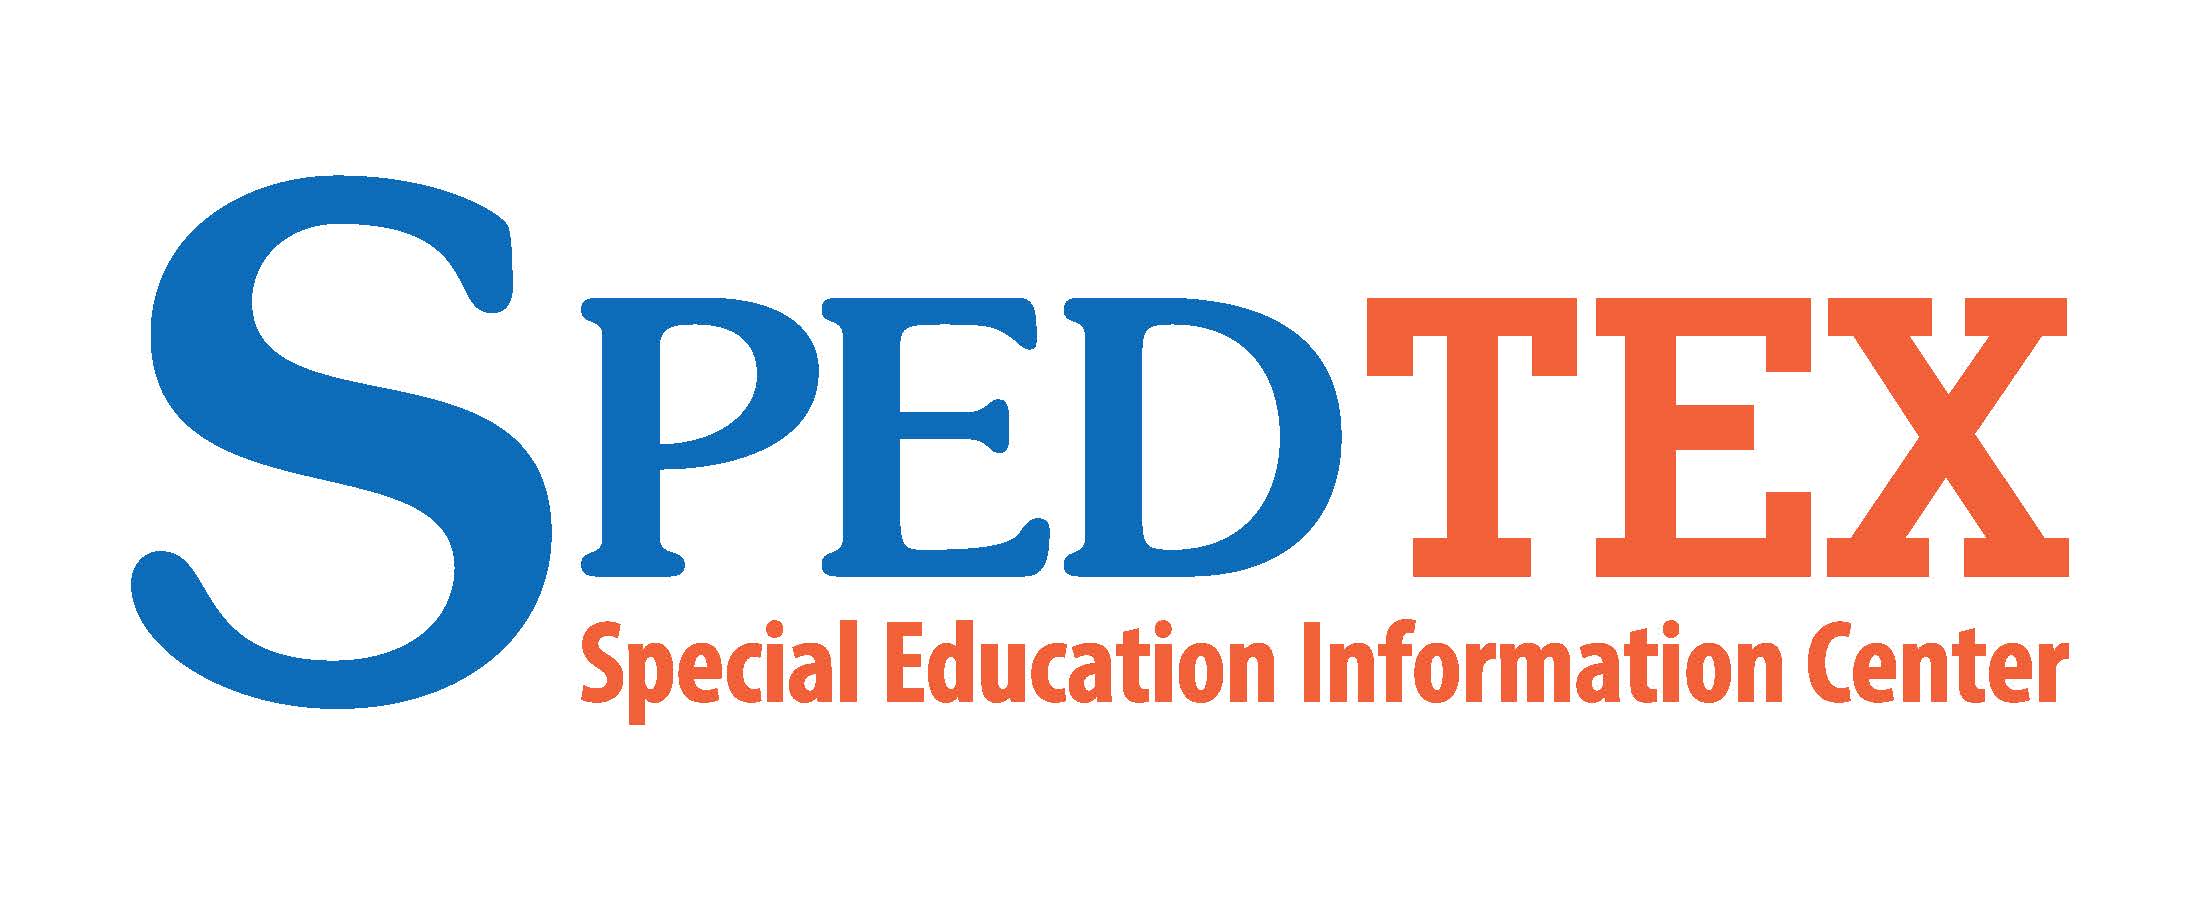 SPEDTEX, "Specical Education Information Center," lgo in blue and red on white